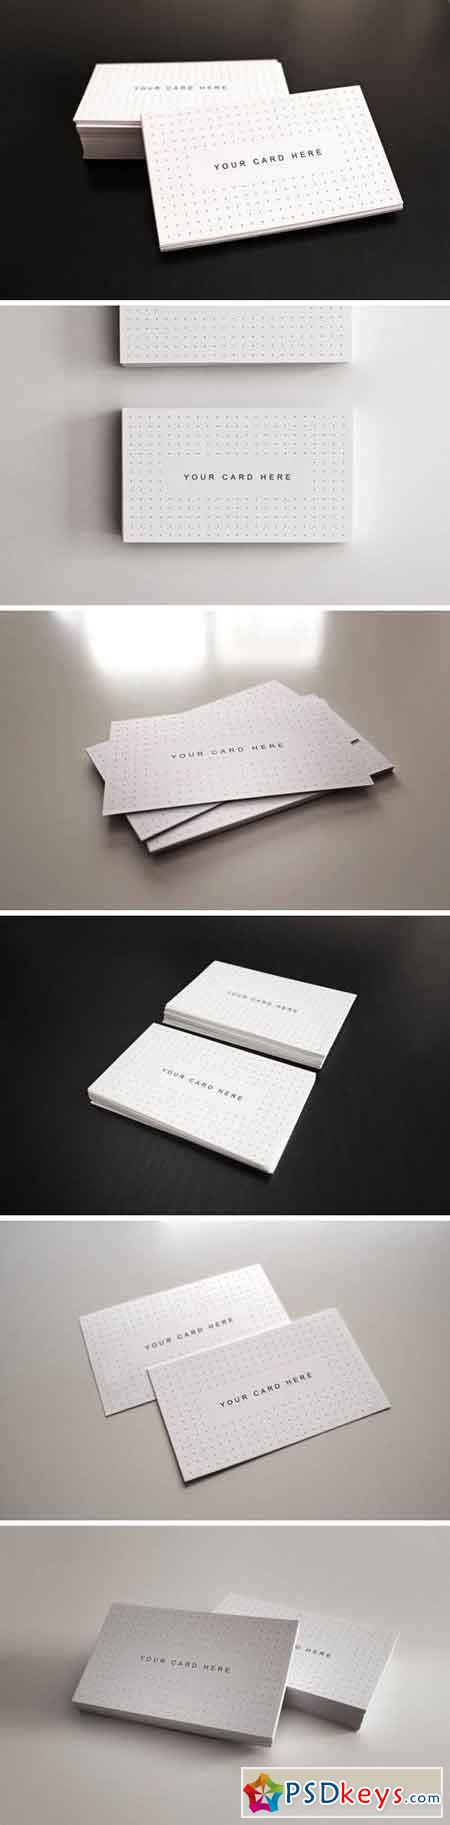 Flyer and Business Card Clean Realistic Mockups 3